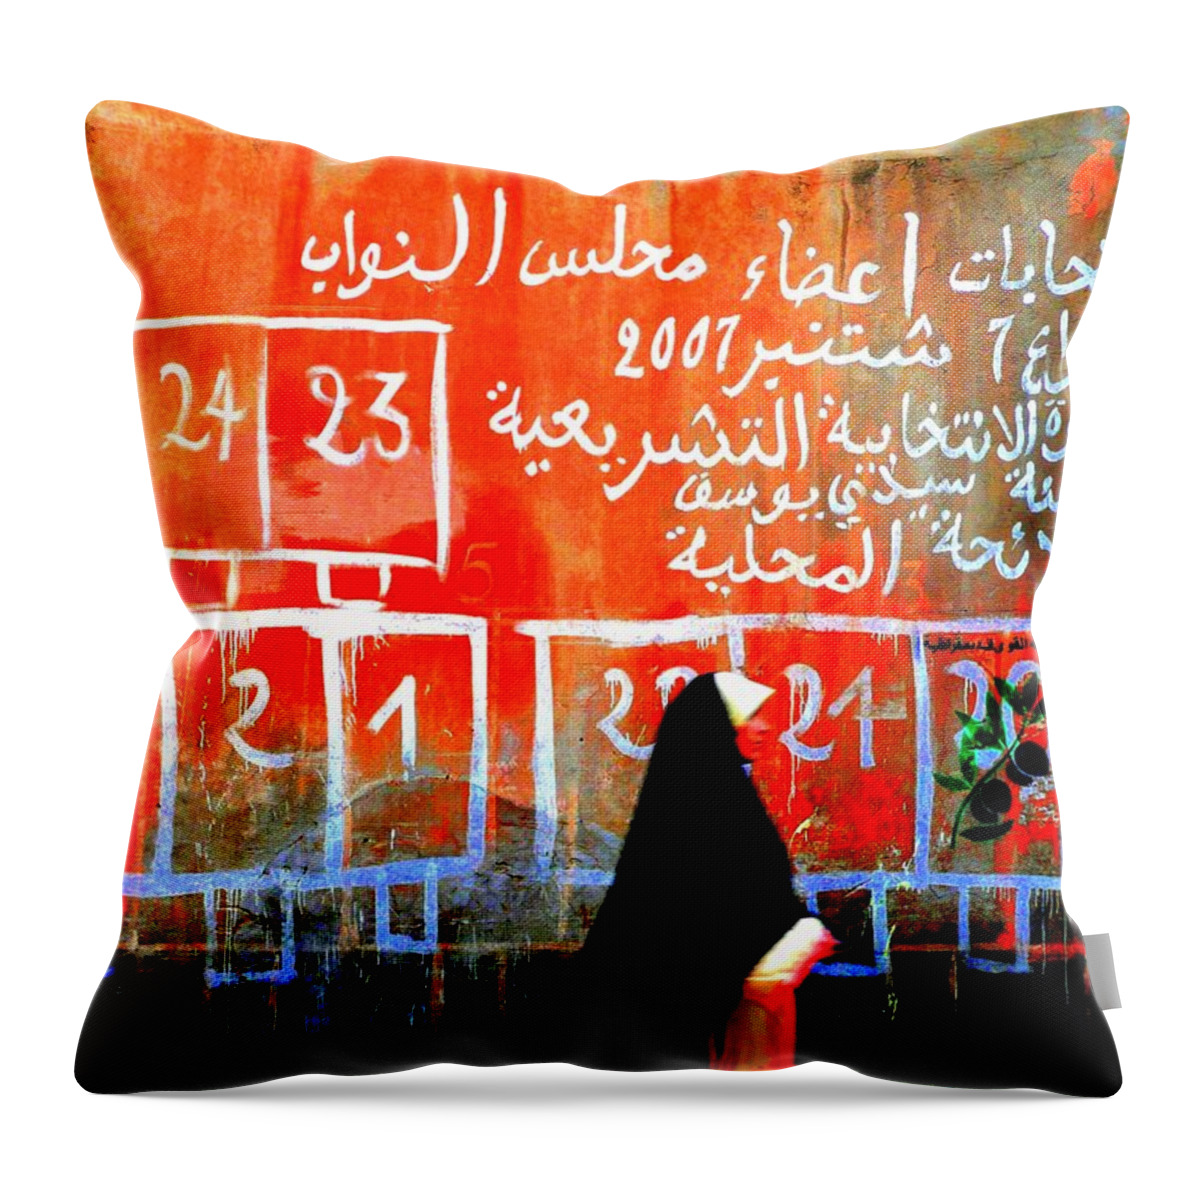 Marrakech Throw Pillow featuring the photograph Passing by Marrakech Red Wall by Funkpix Photo Hunter